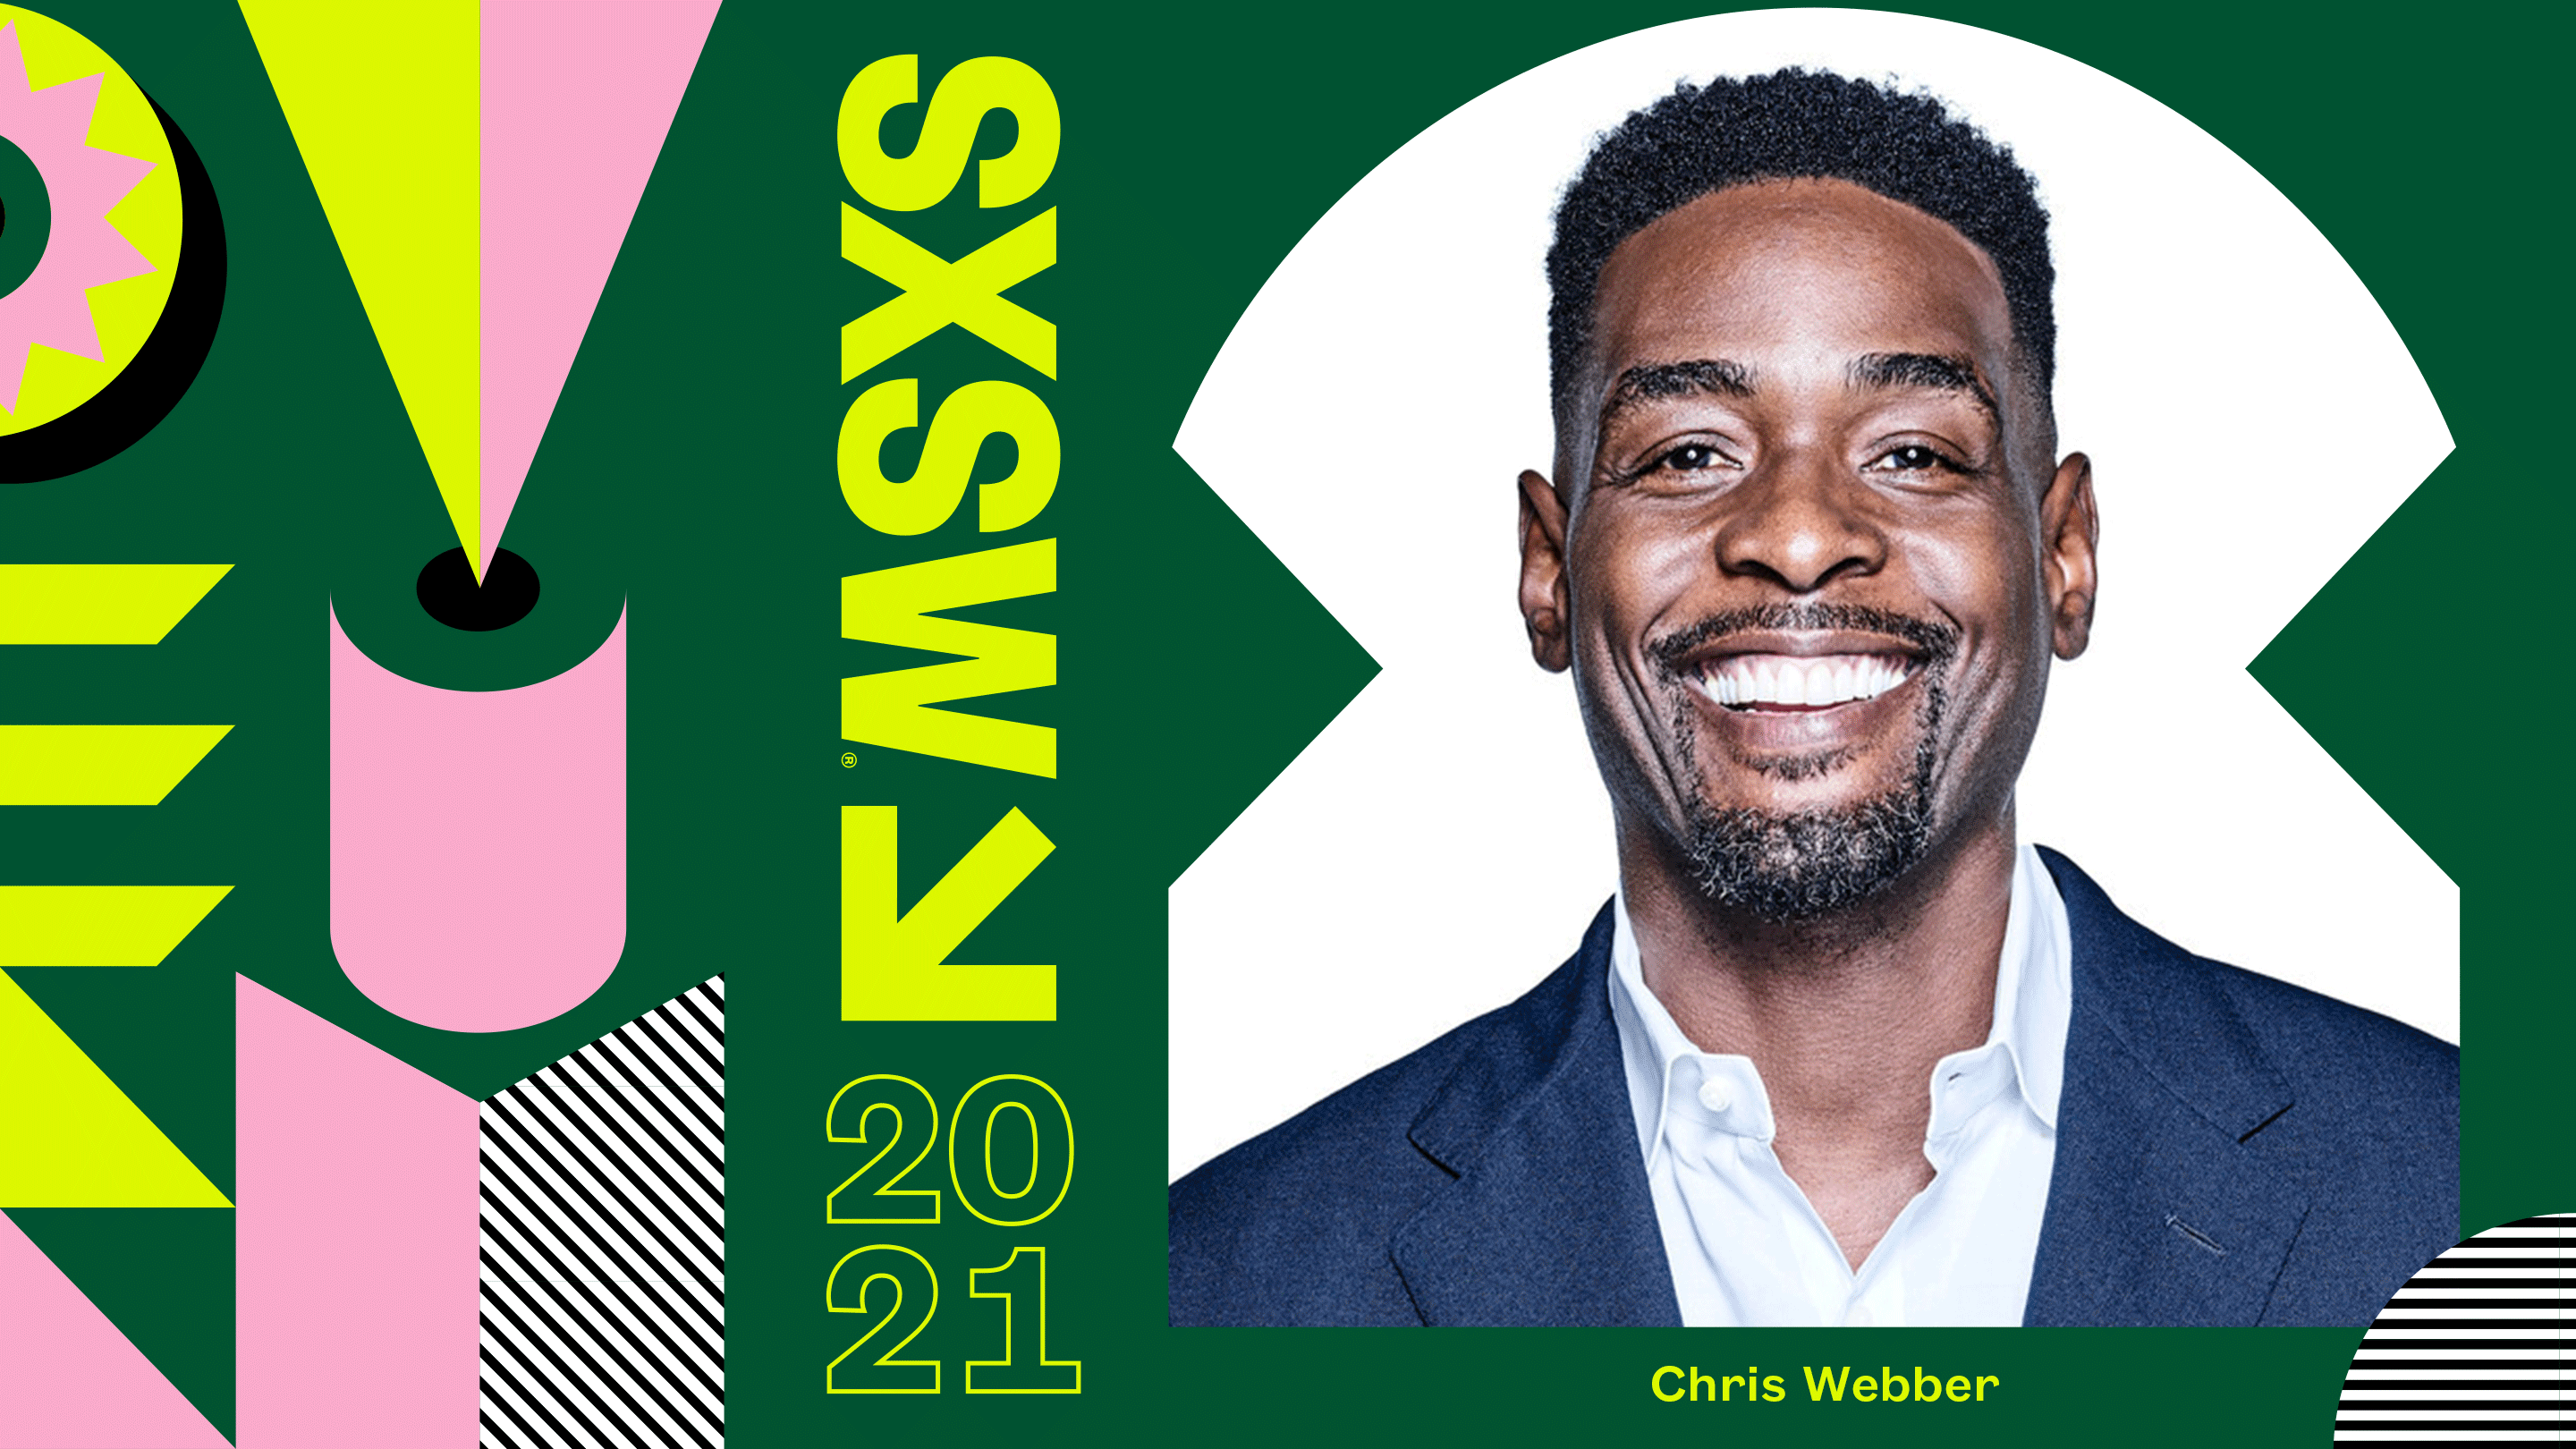 2021 Featured Speakers: Chris Webber, Erin Lee Carr, and Mark Cuban